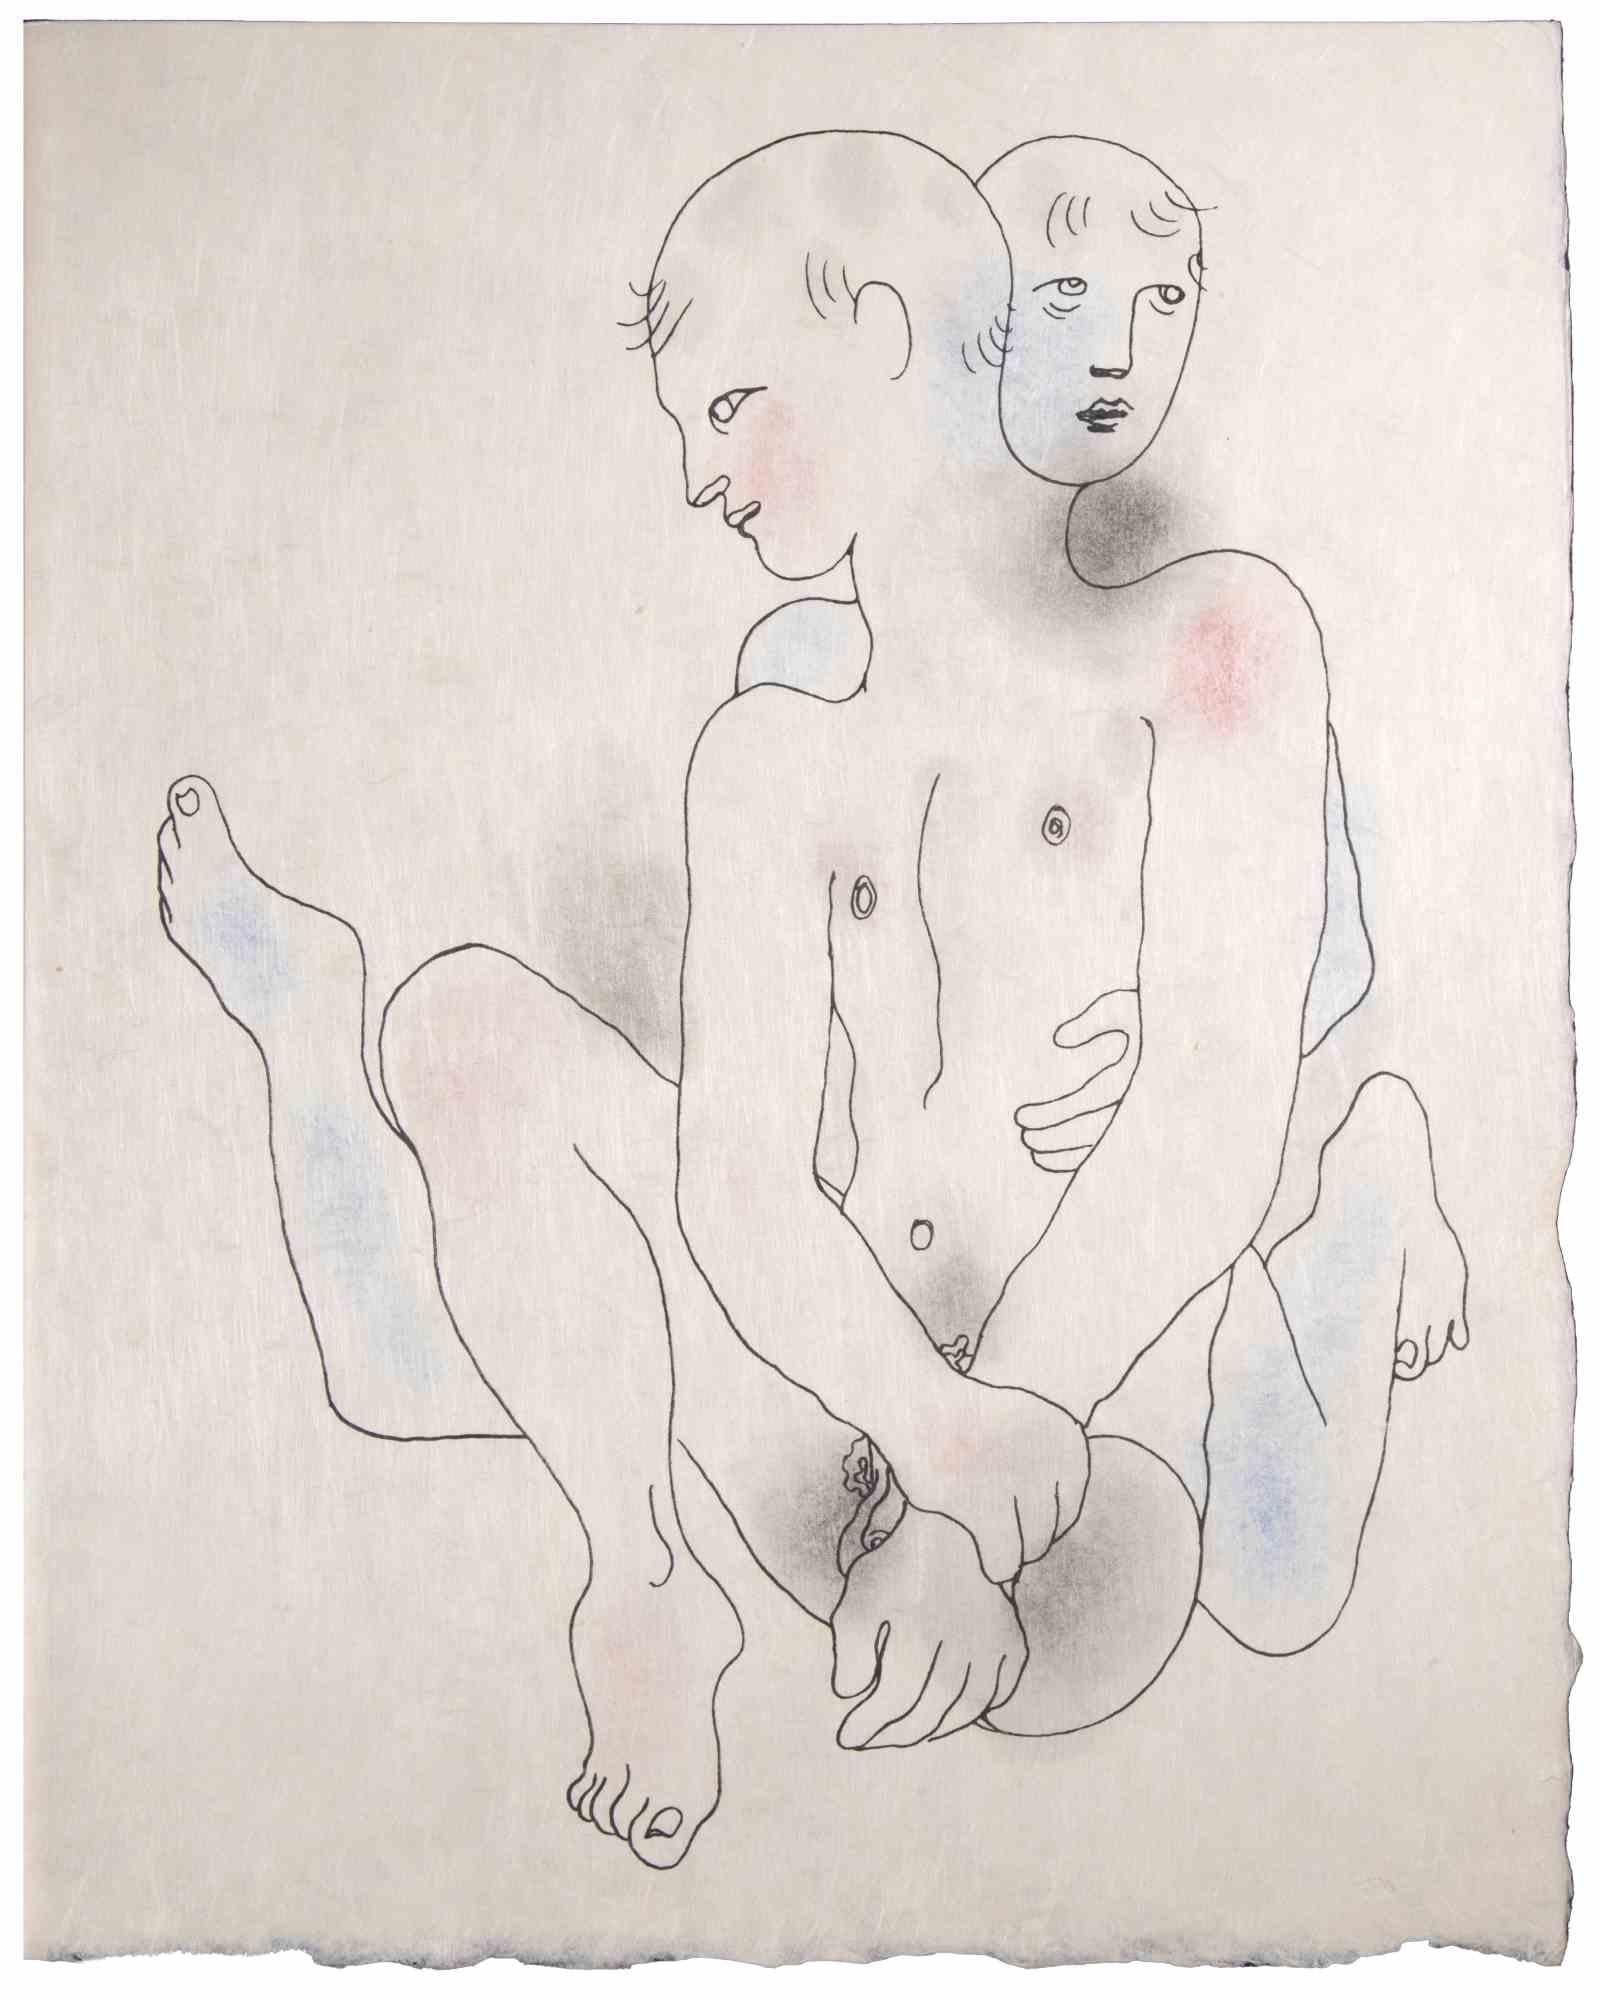 Nudes is a Colored lithograph realized on japan paper by Jean Cocteau (1889 -1963) in 1930 ca. 

French draftsman, poet, essayist, playwright, librettist, film director.

Excellent condition, no signature.

The artwork represents a young man.

Jean